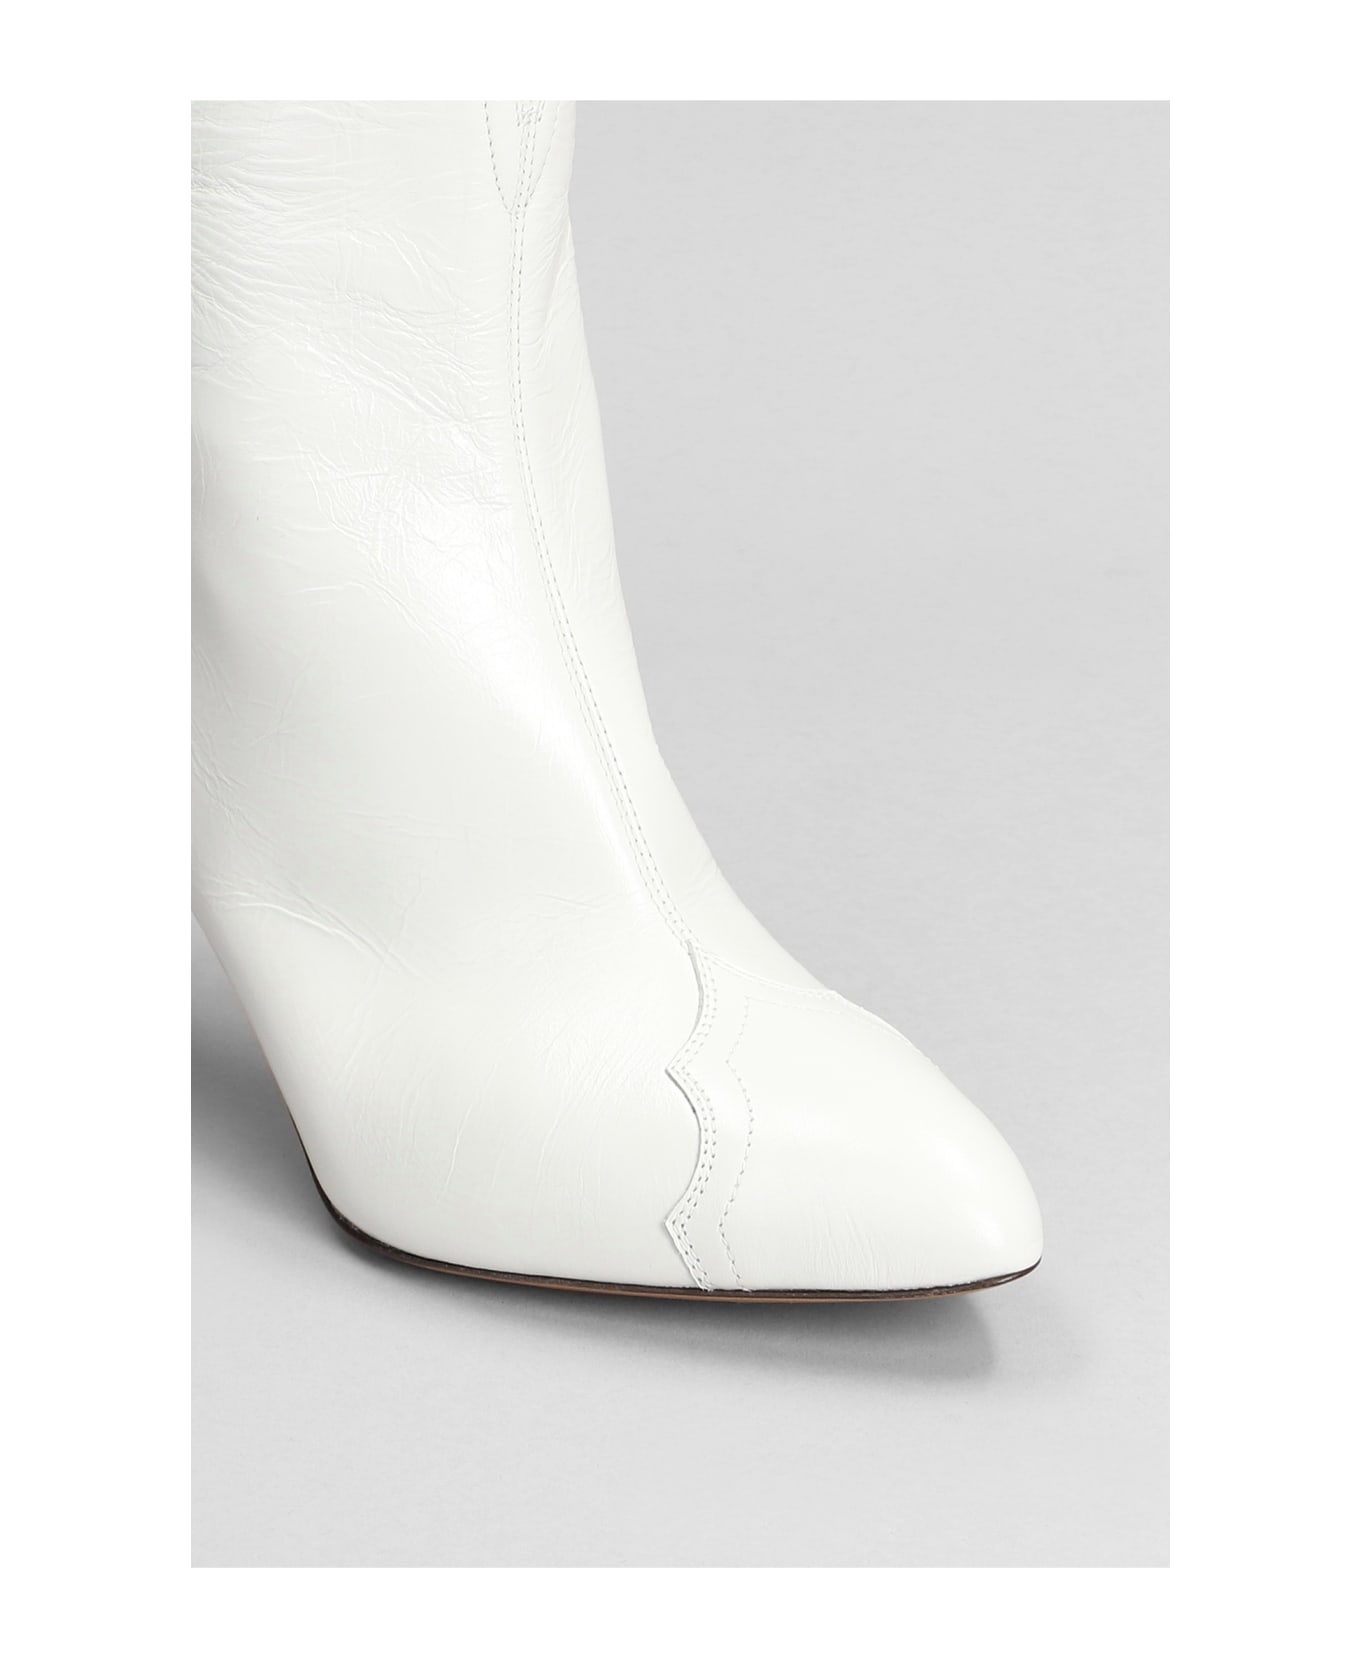 Isabel Marant Dytho High Heels Ankle Boots - WHITE ブーツ